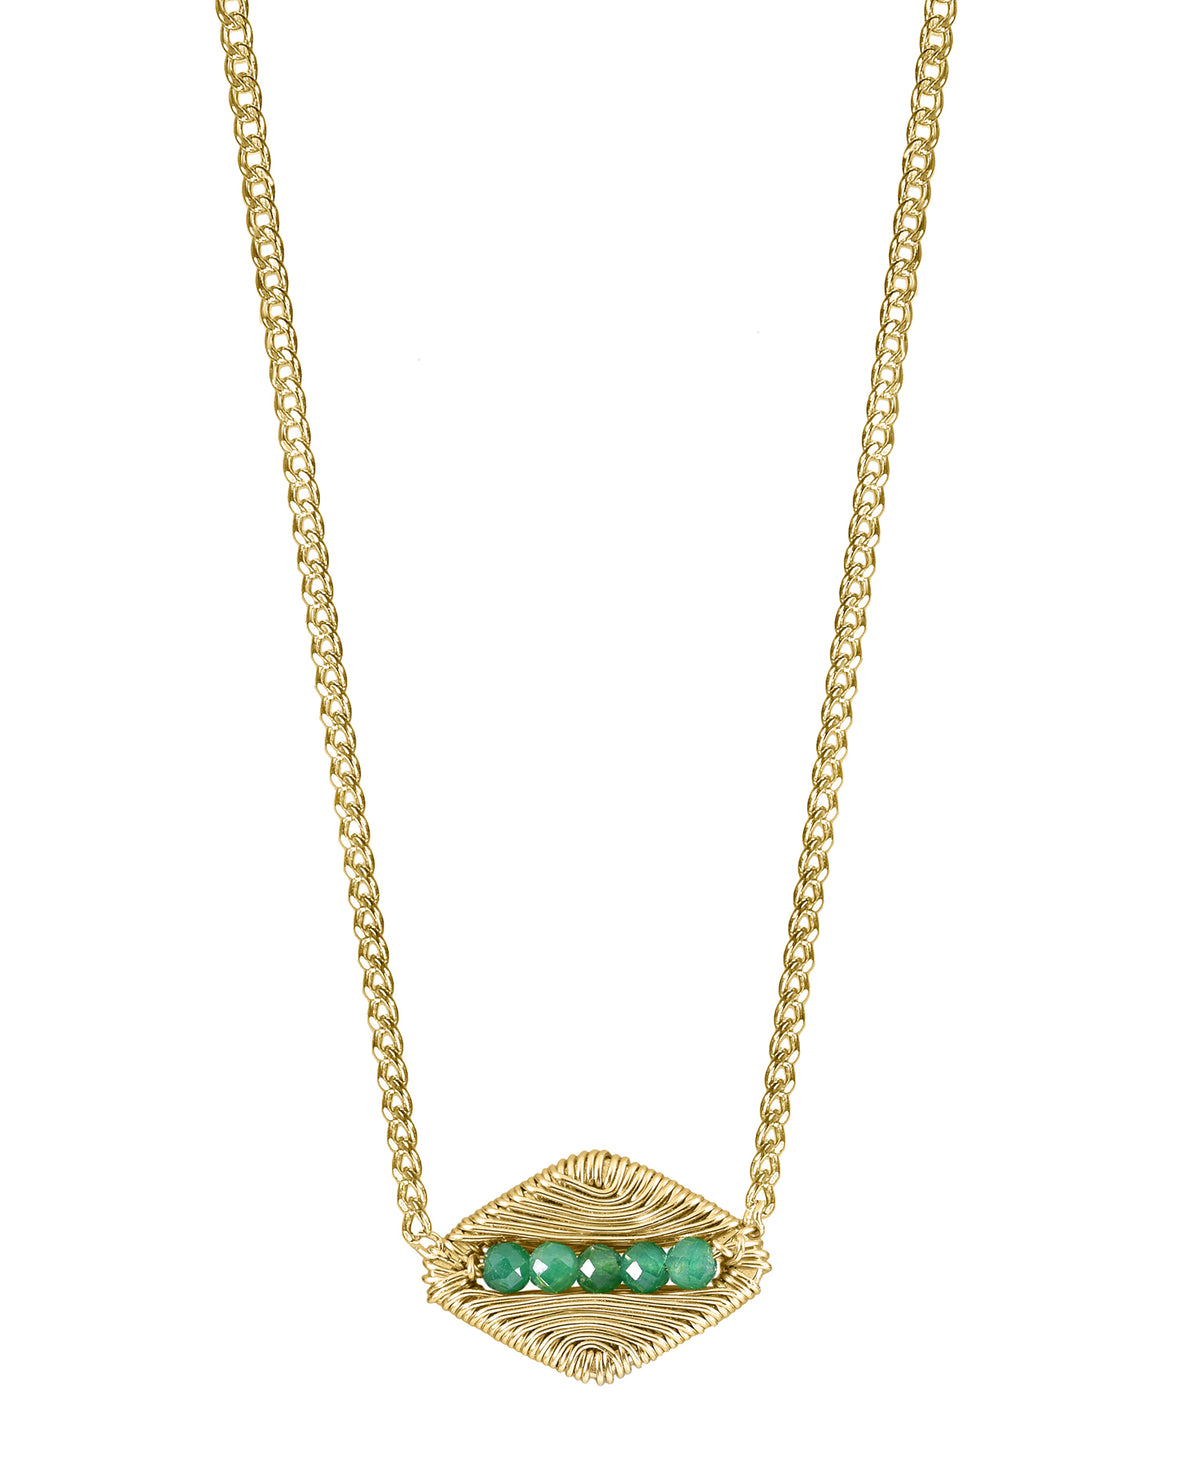 Emerald 14k gold fill Necklace measures 16&quot; in length Pendant measures 3/8&quot; in length and 1/2&quot; in width Handmade in our Los Angeles studio